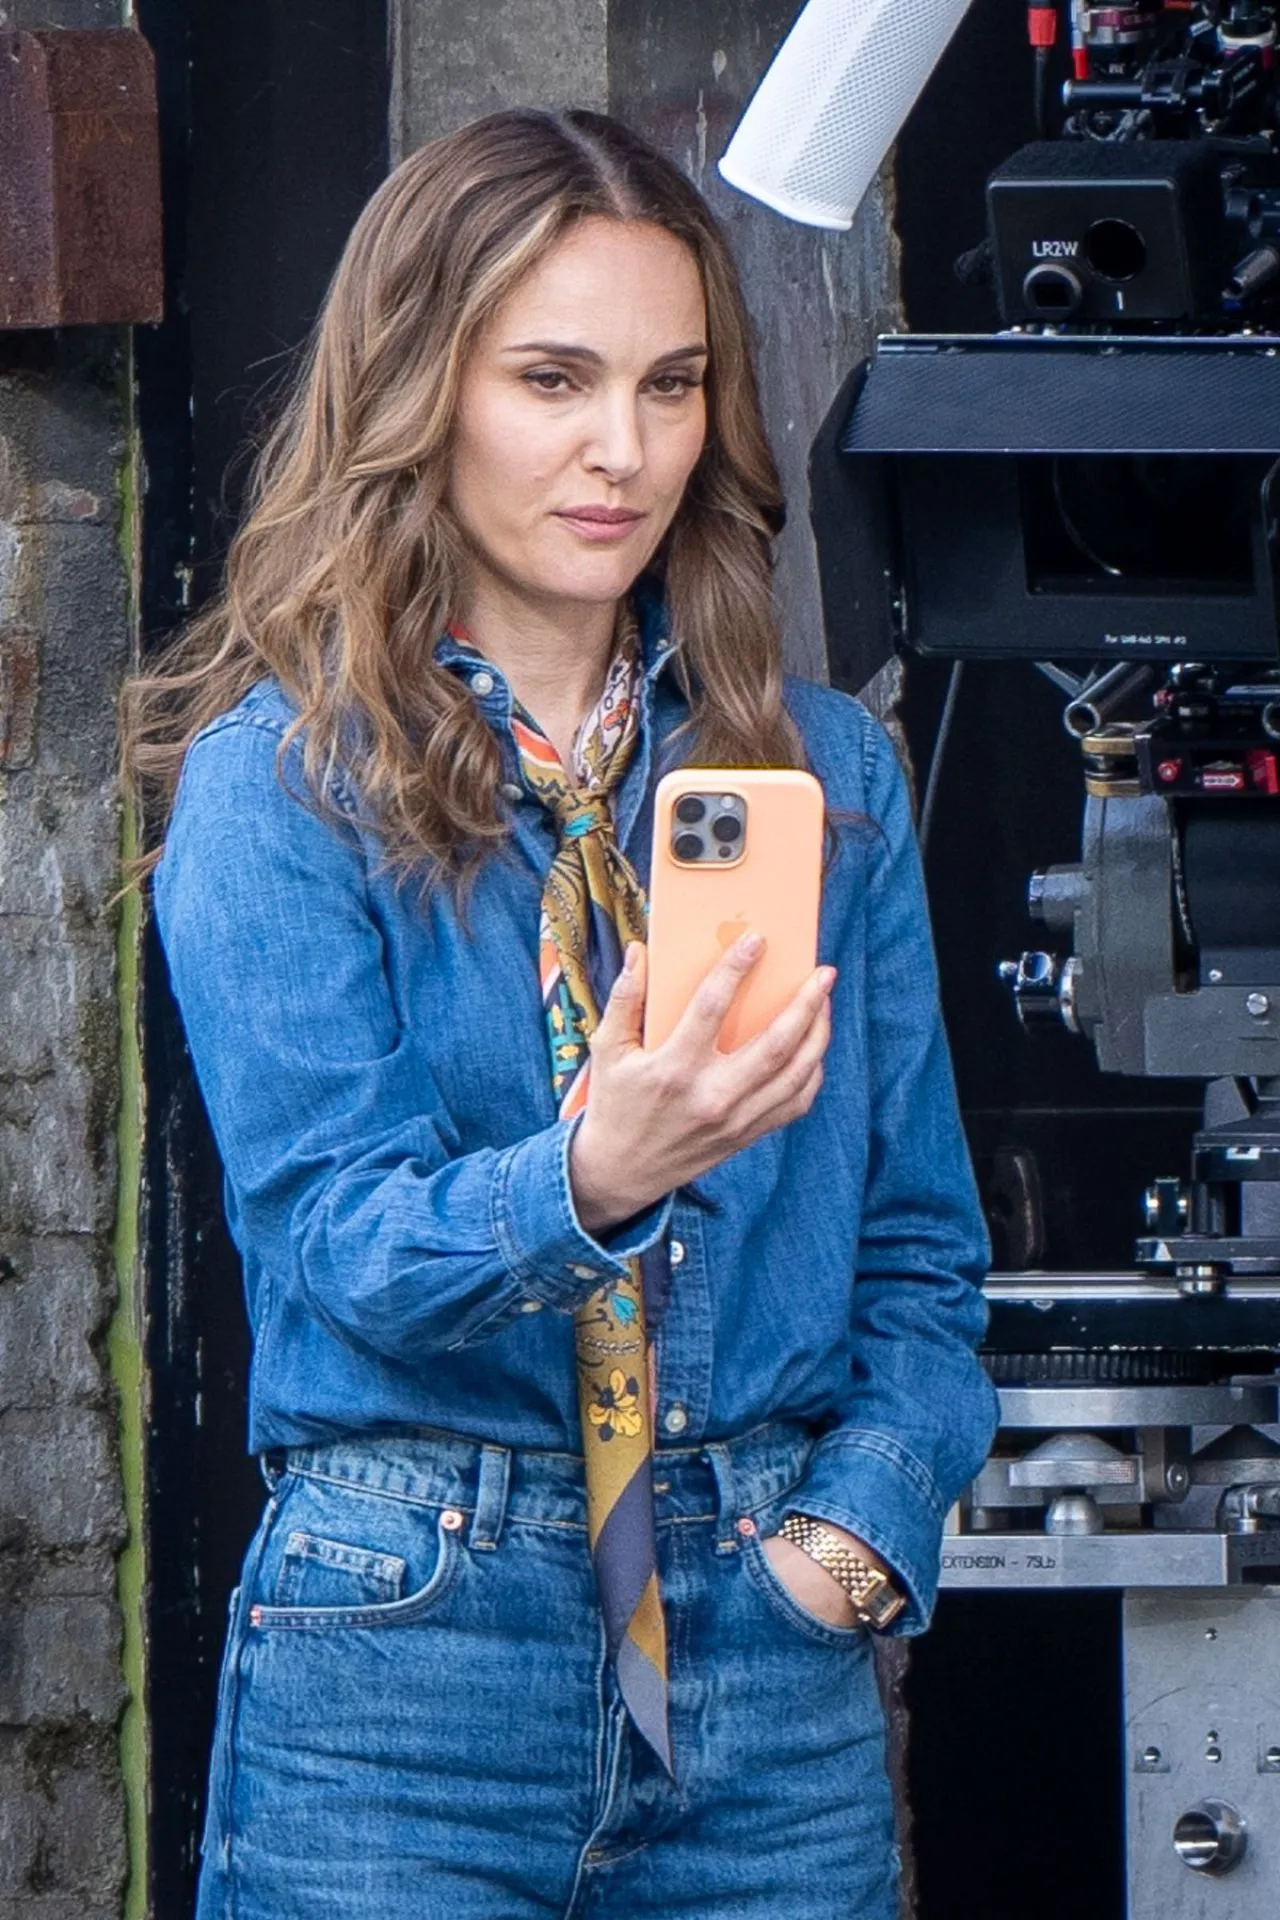 NATALIE PORTMAN ON THE SET OF FOUNTAIN OF YOUTH IN LONDON